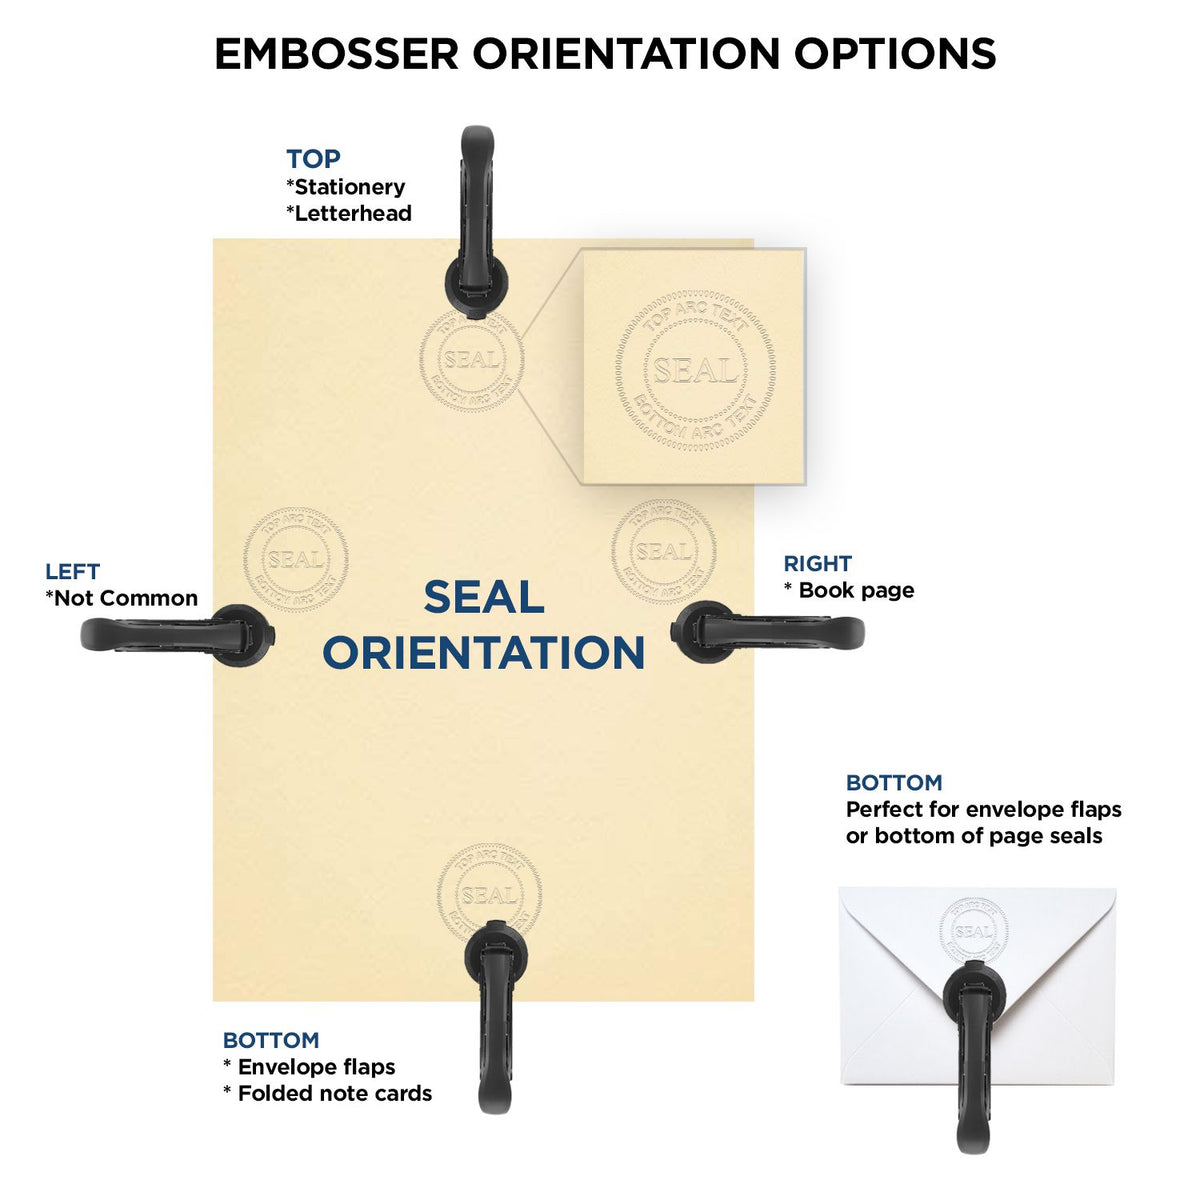 An infographic for the Gift Delaware Land Surveyor Seal showing embosser orientation, this is showing examples of a top, bottom, right and left insert.